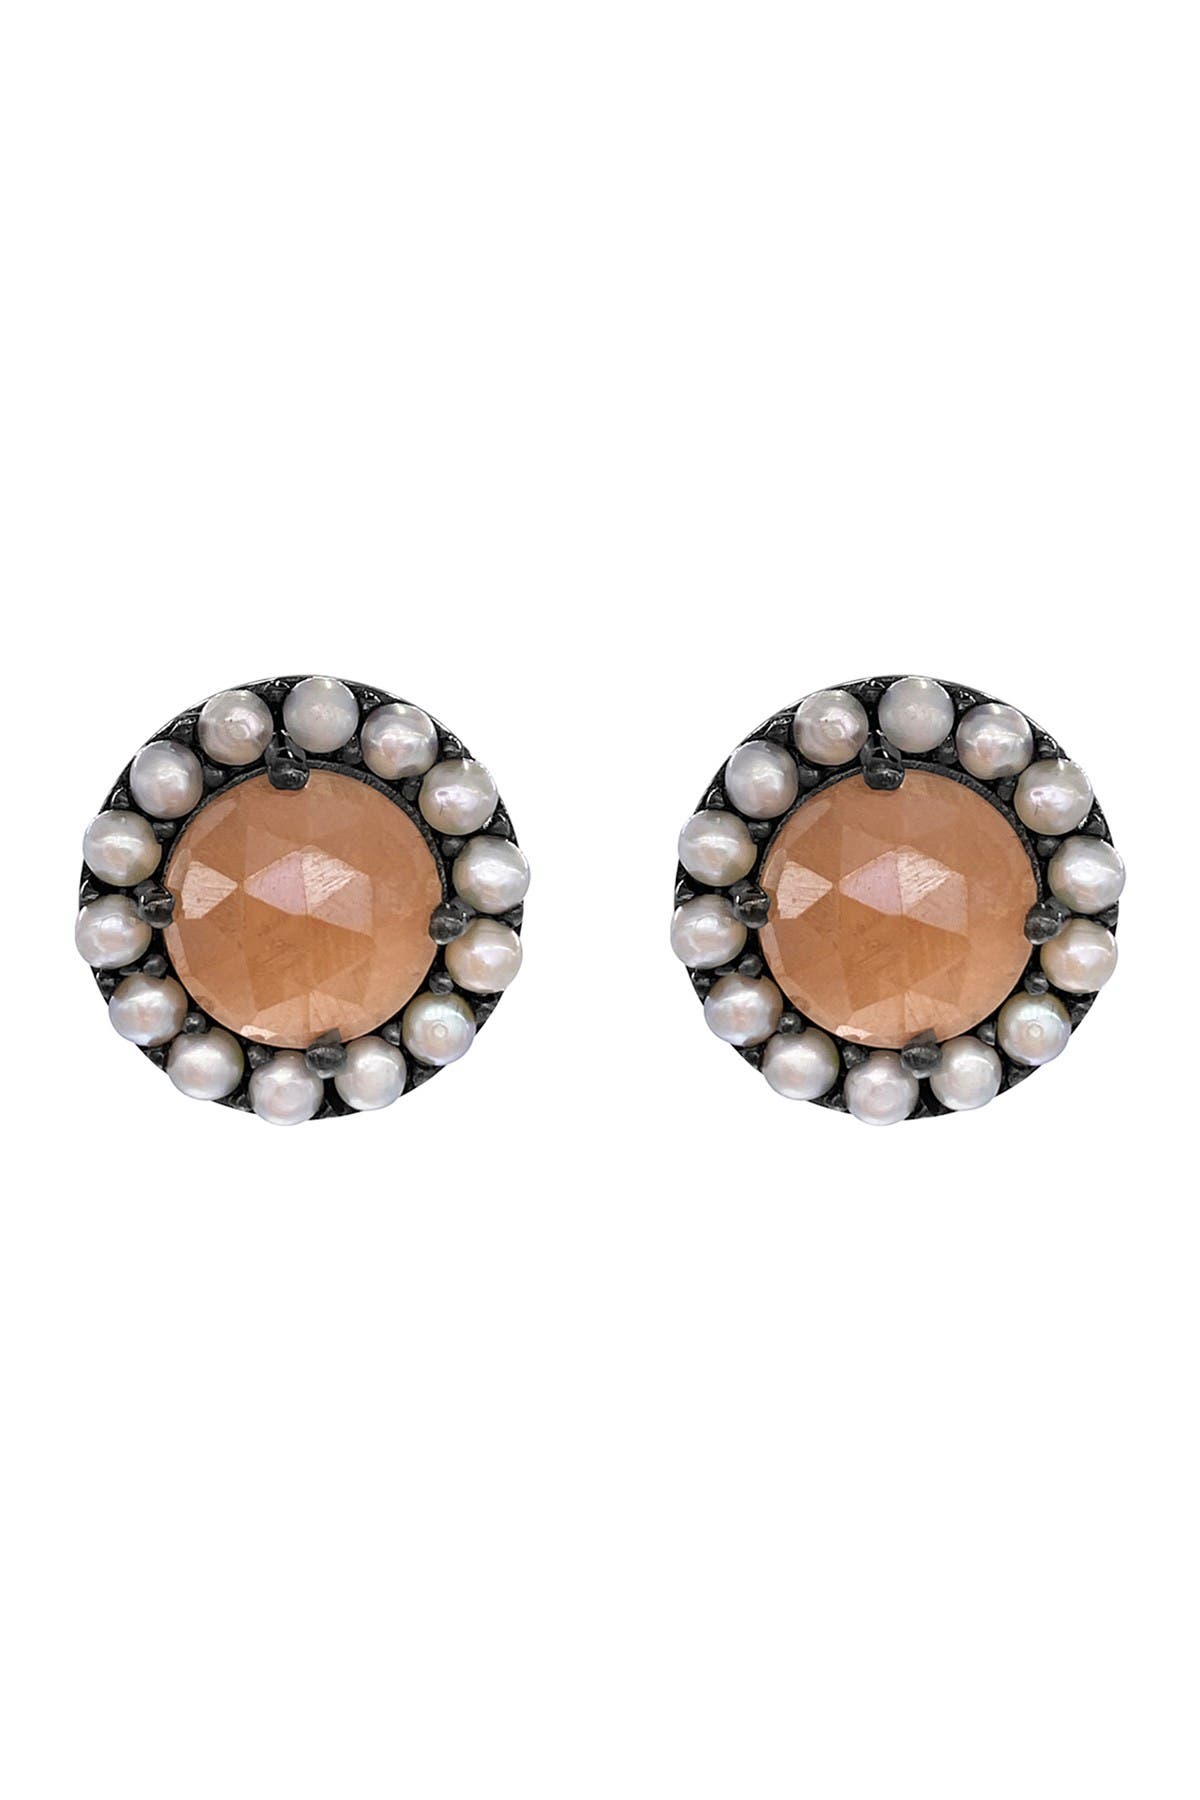 Adornia Fine Black Rhodium Plated Sterling Silver Peach Moonstone & 2mm Pearl Halo Stud Earrings In Pink